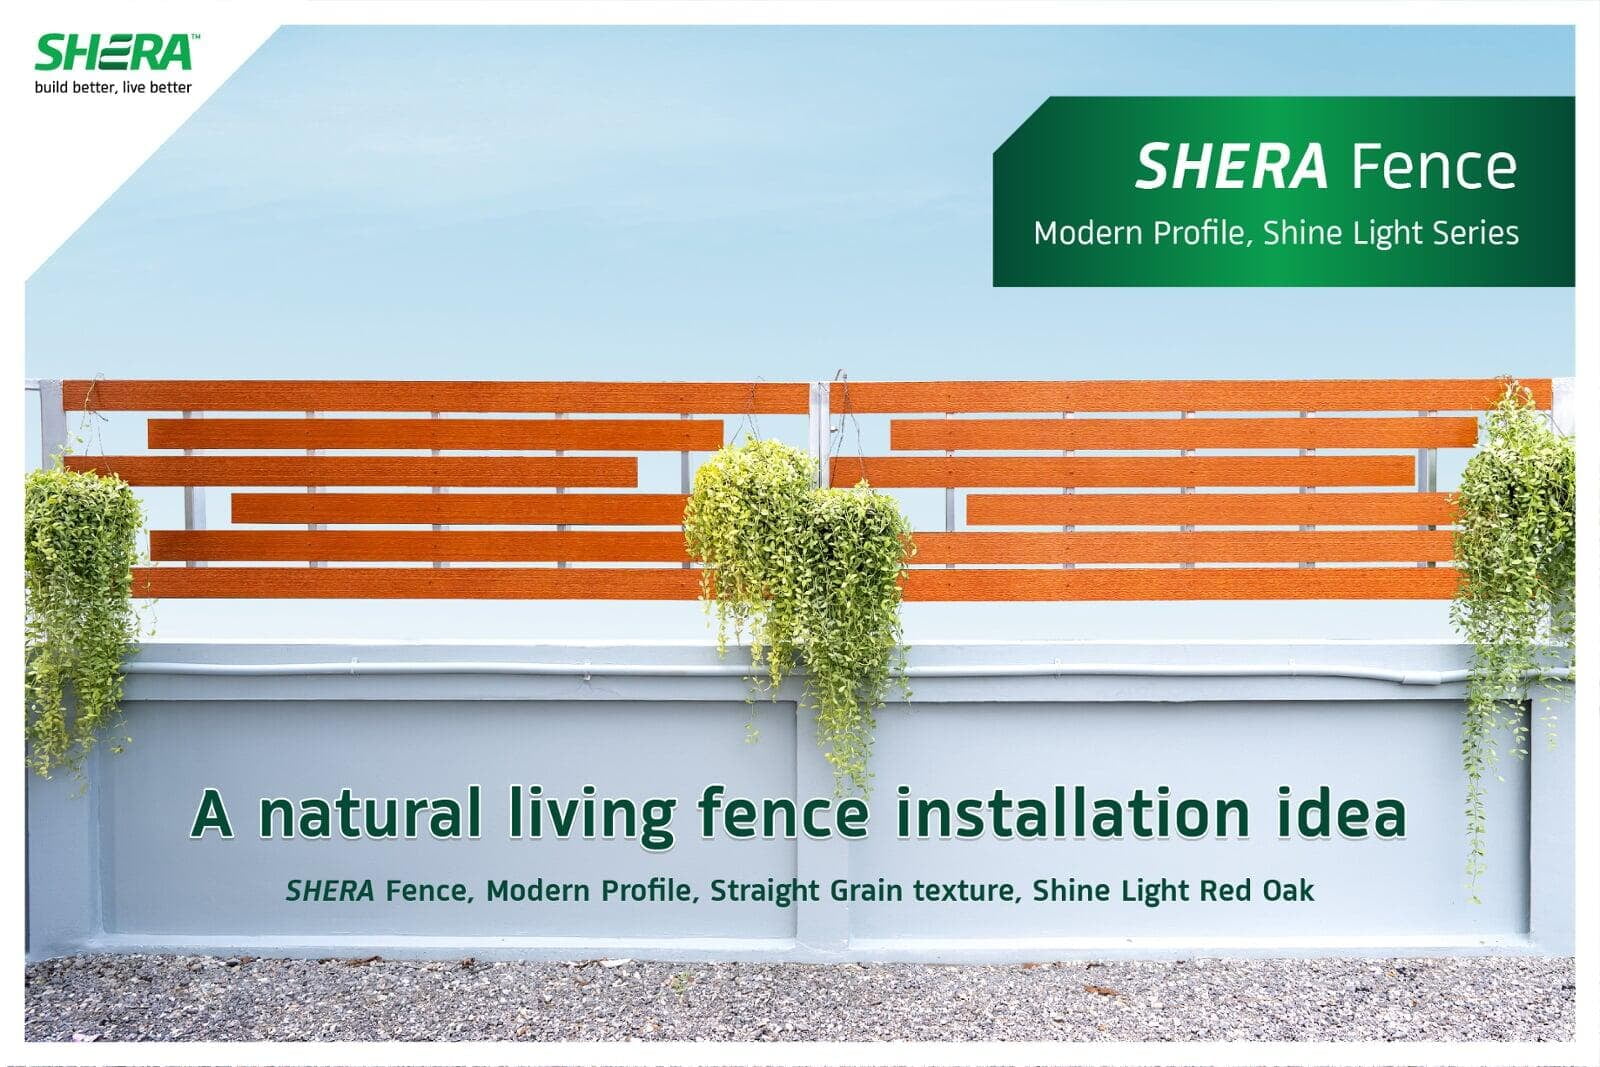 SHERA Fence is a fibre cement, low maintenance, easy to install exterior fence product